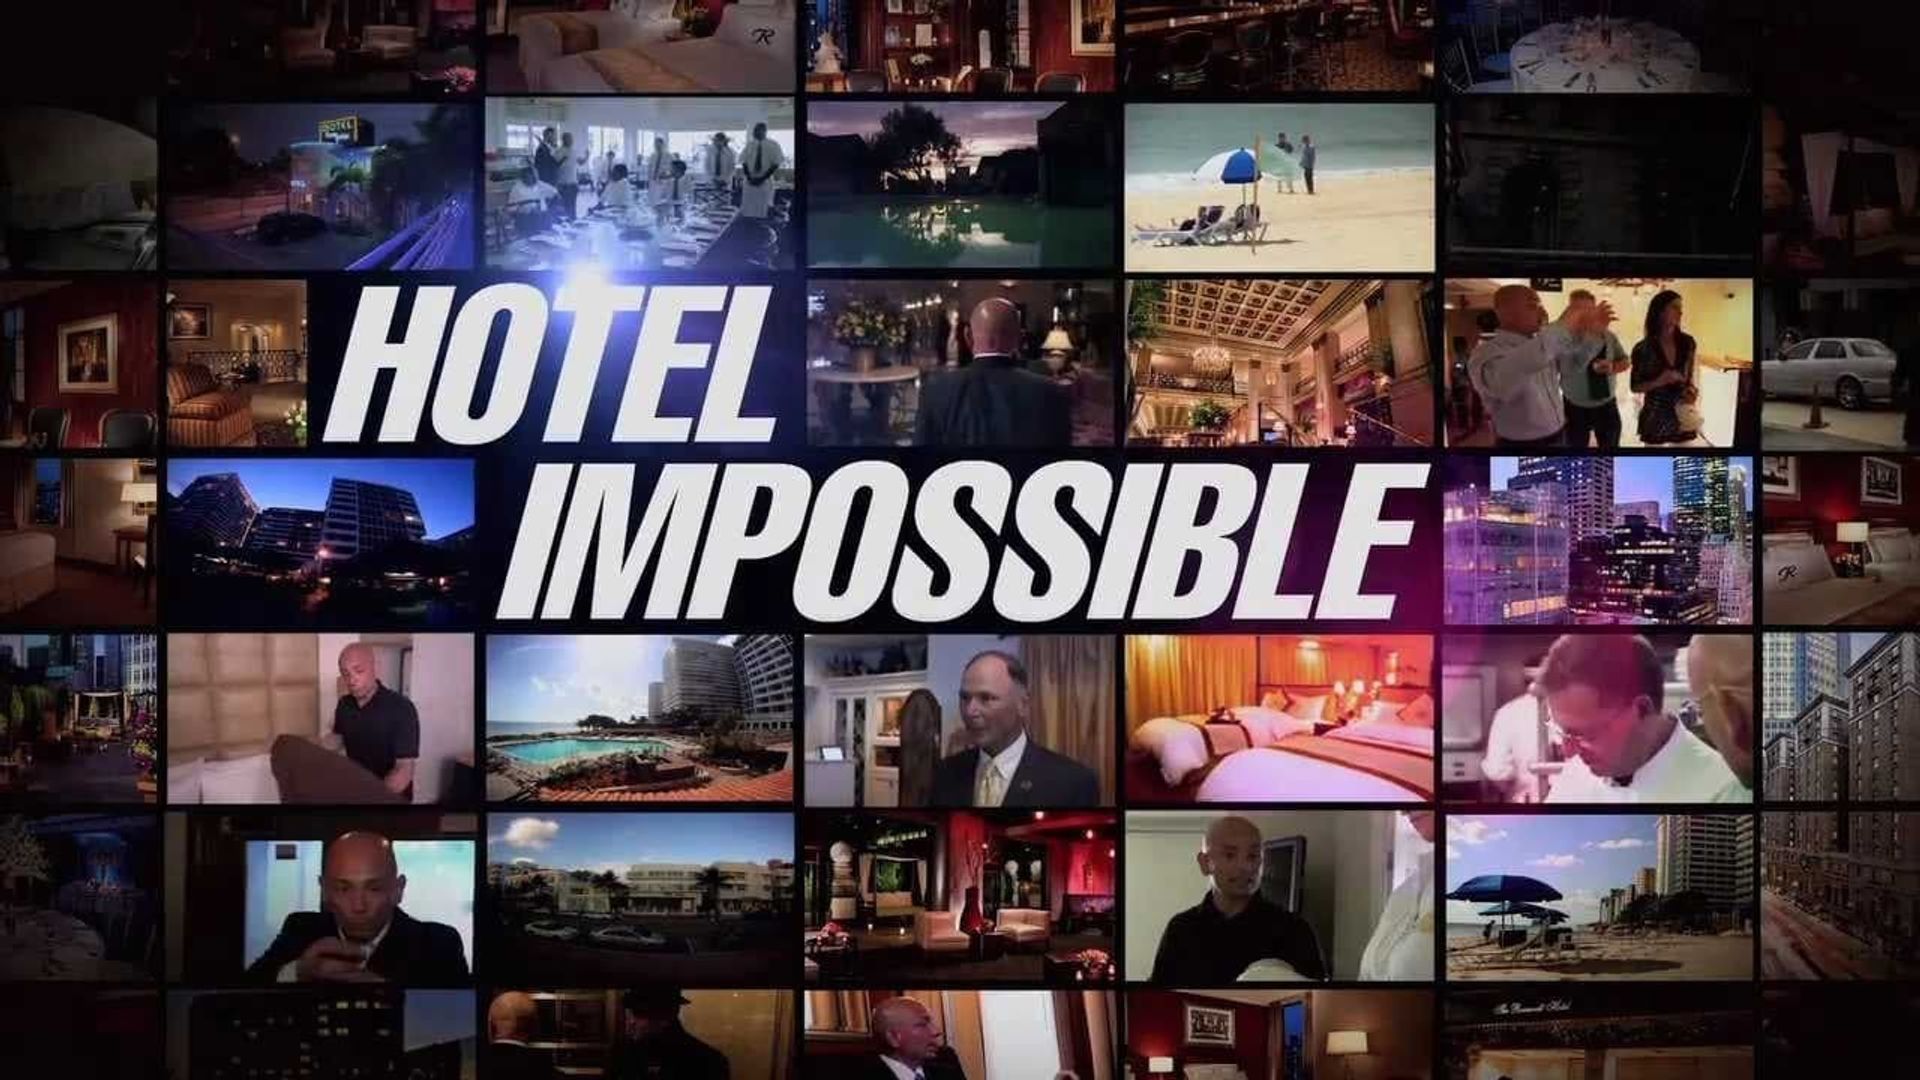 Hotel Impossible background